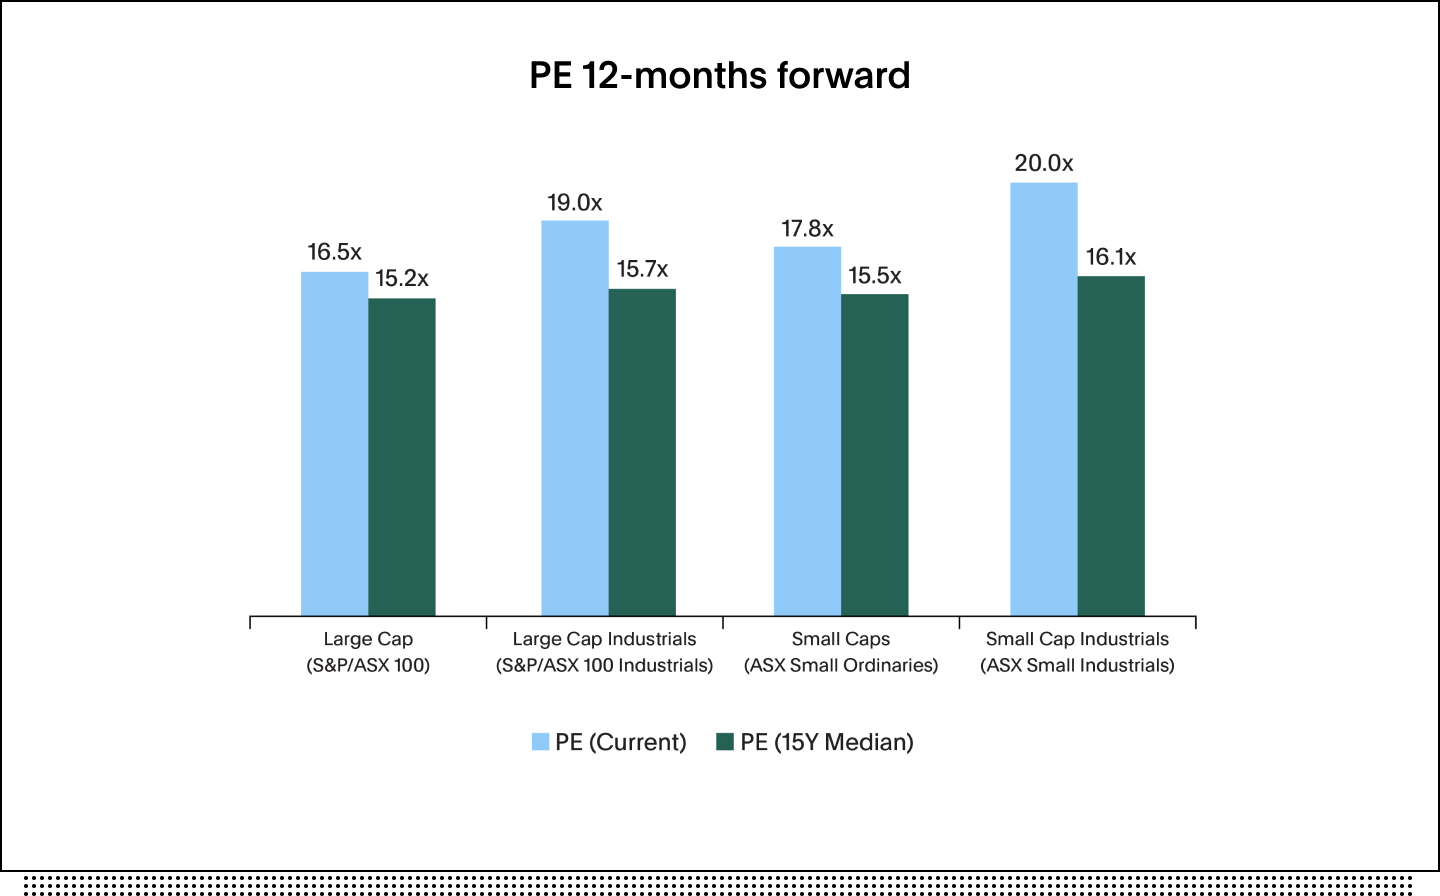 Graph showing comparison between PE Current and PE 15 year median of Large Cap and Small Cap investments